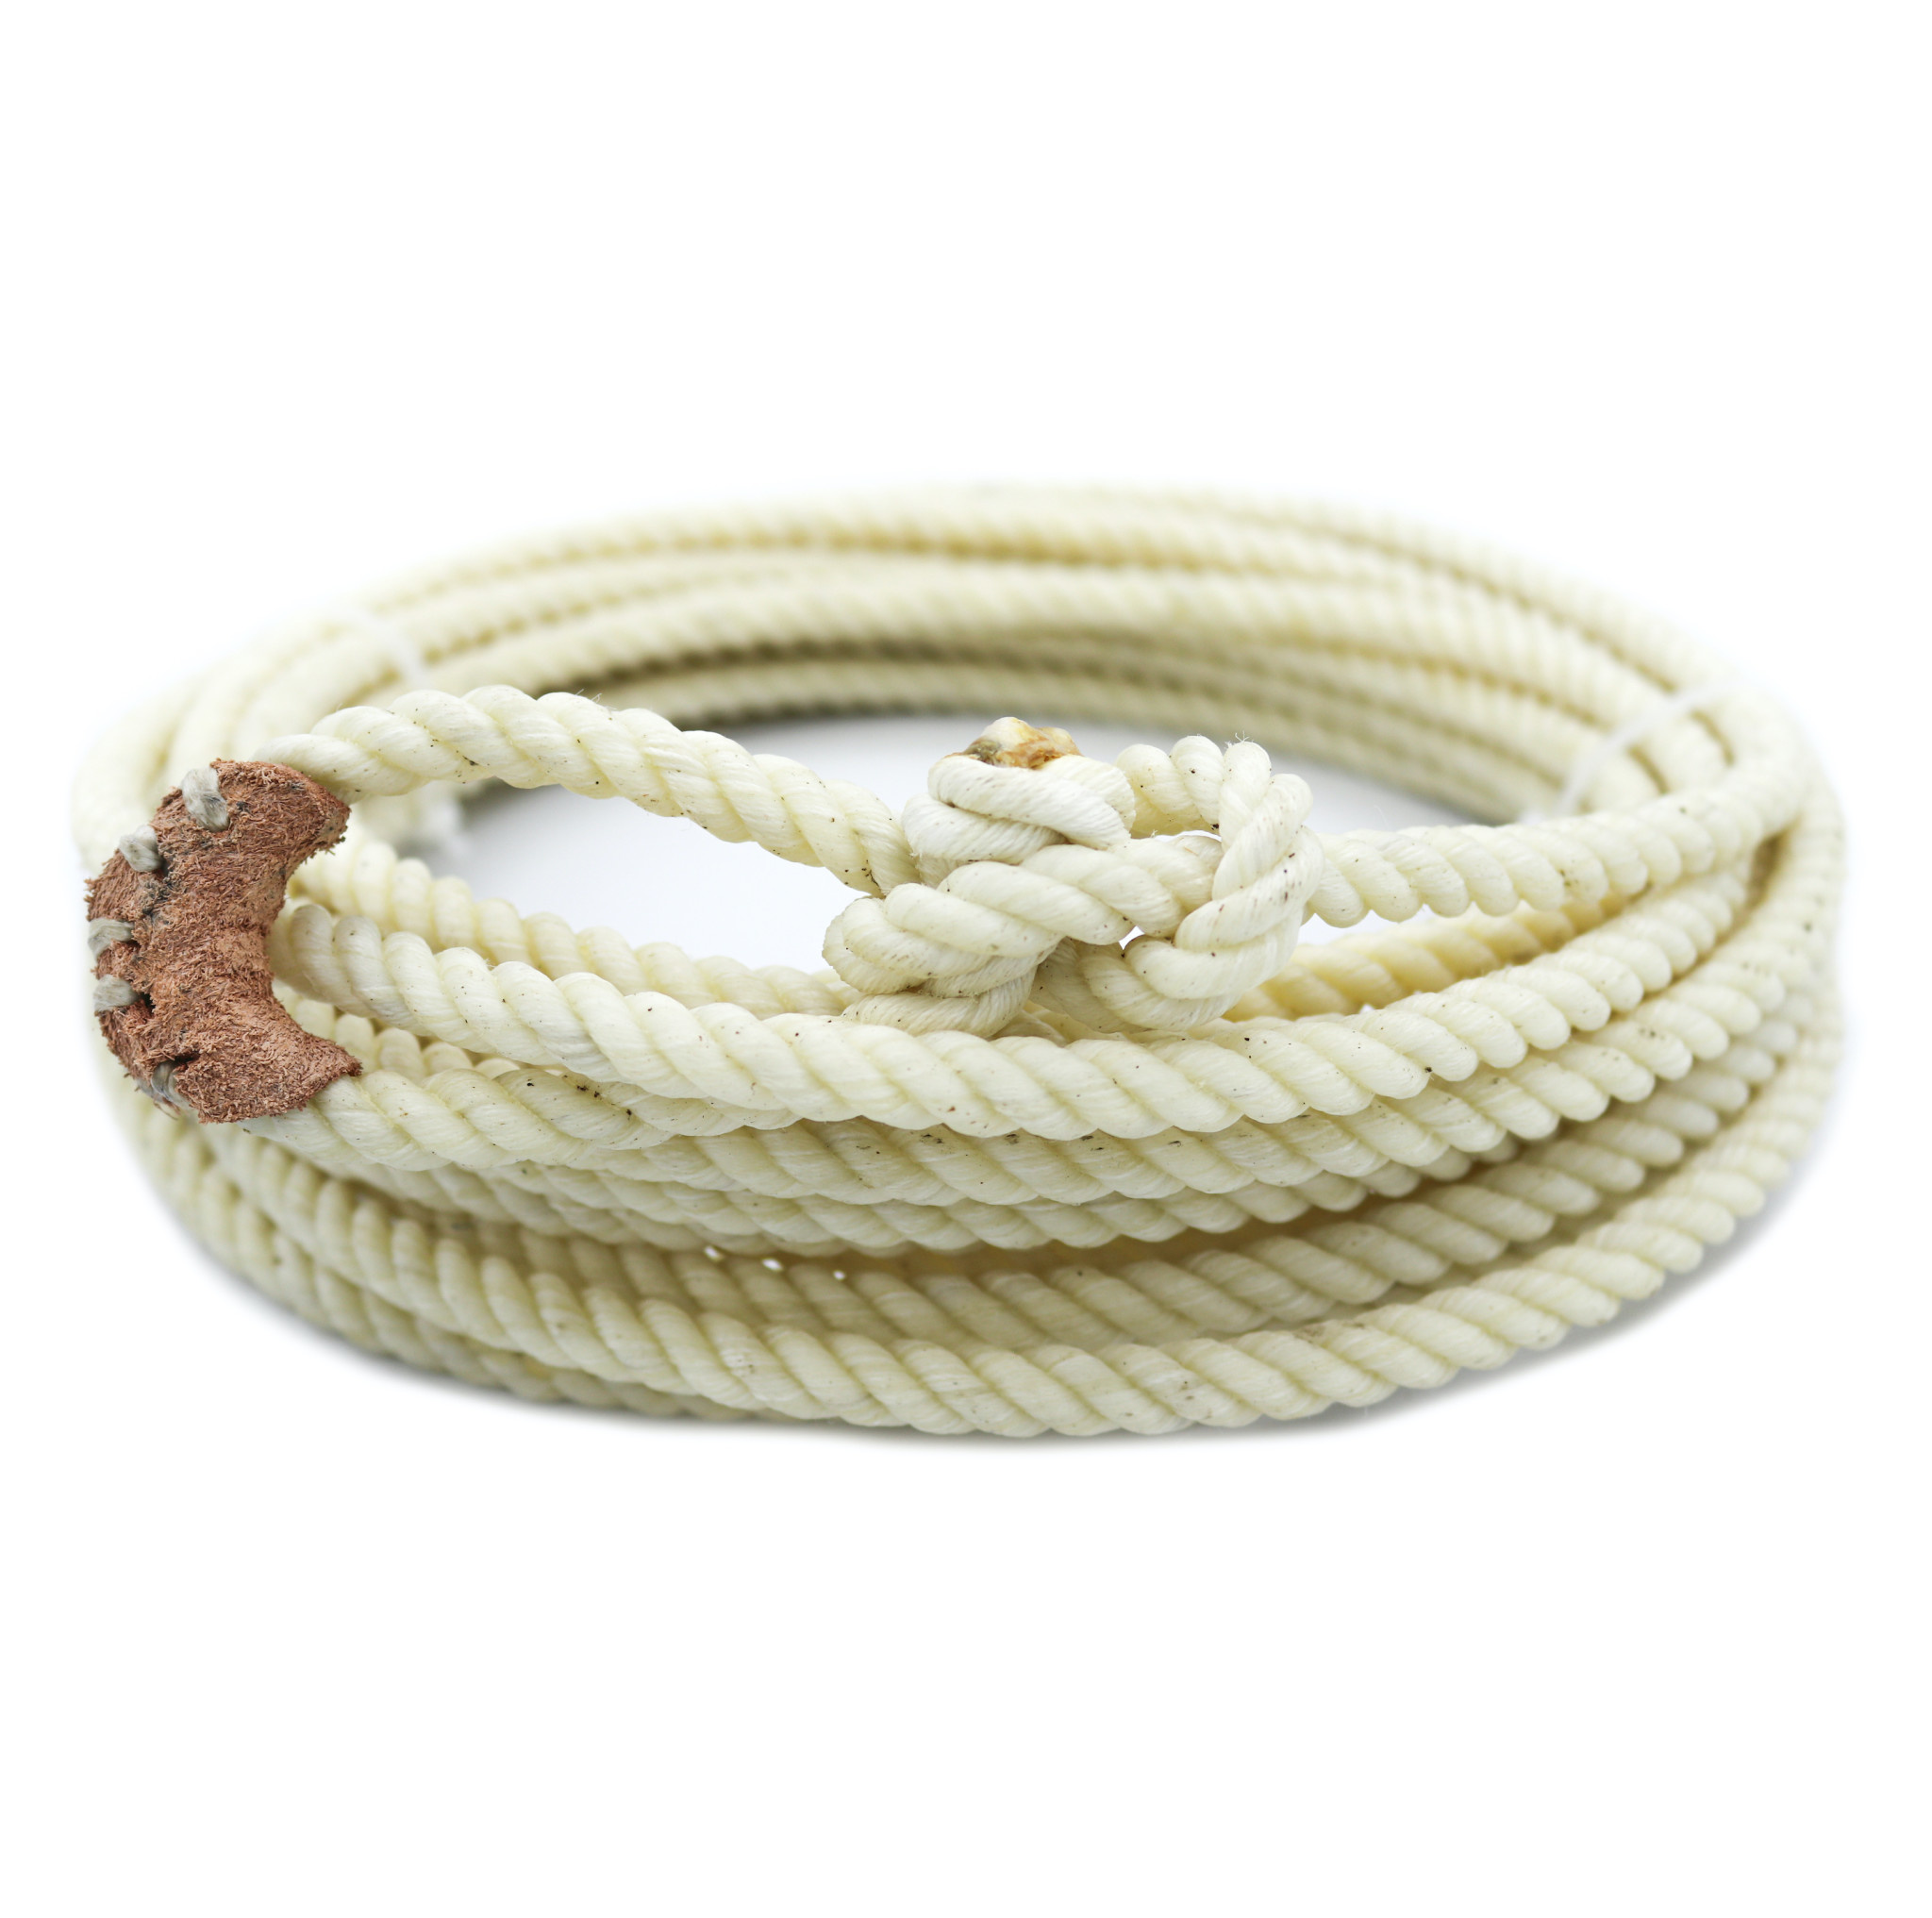 30 FT Western Adult Lasso Rope Rodeo - M- Royal Saddles